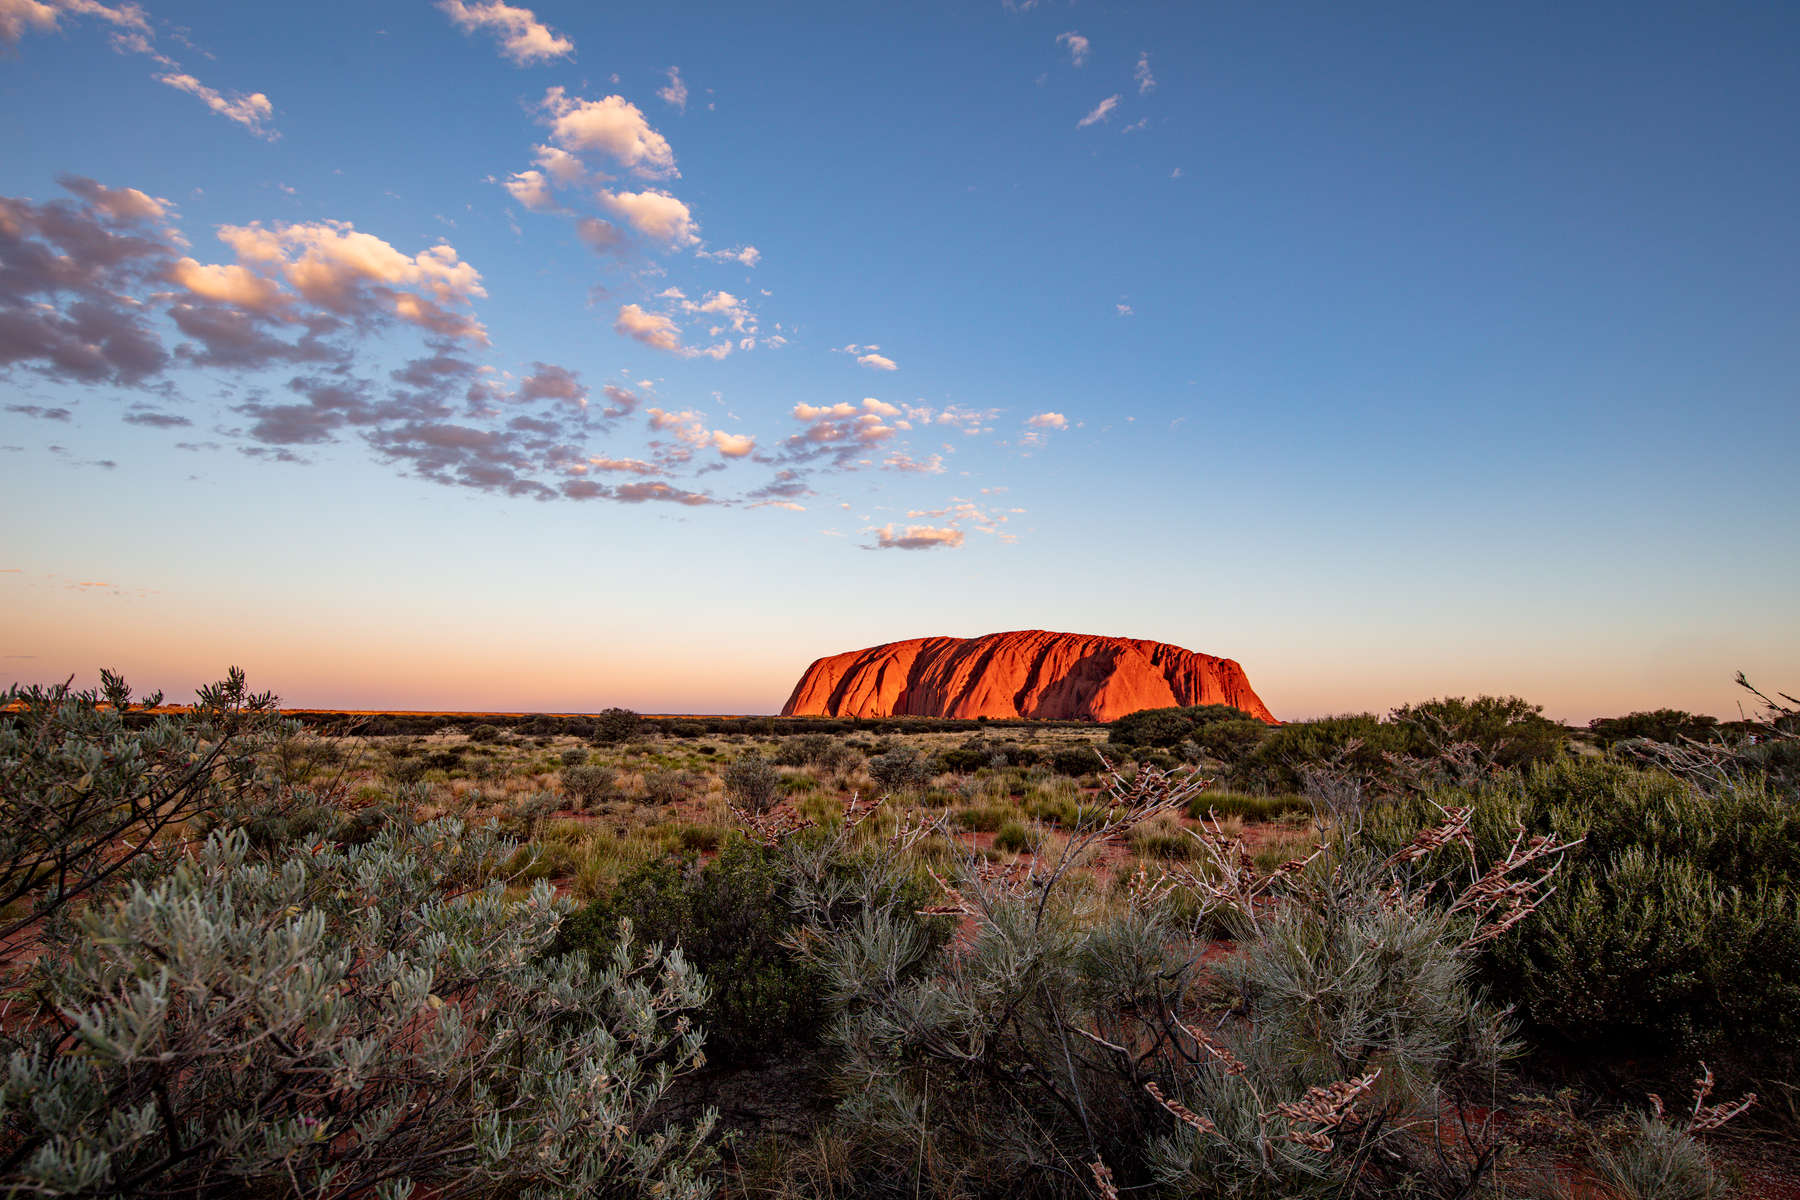 Outback, Australia - November 12, 2022: Sunrise at the Majestic Uluru or Ayers Rock at in the Northern Territory, Australia. The red rock in the center of the Australian outback. impressive landscape